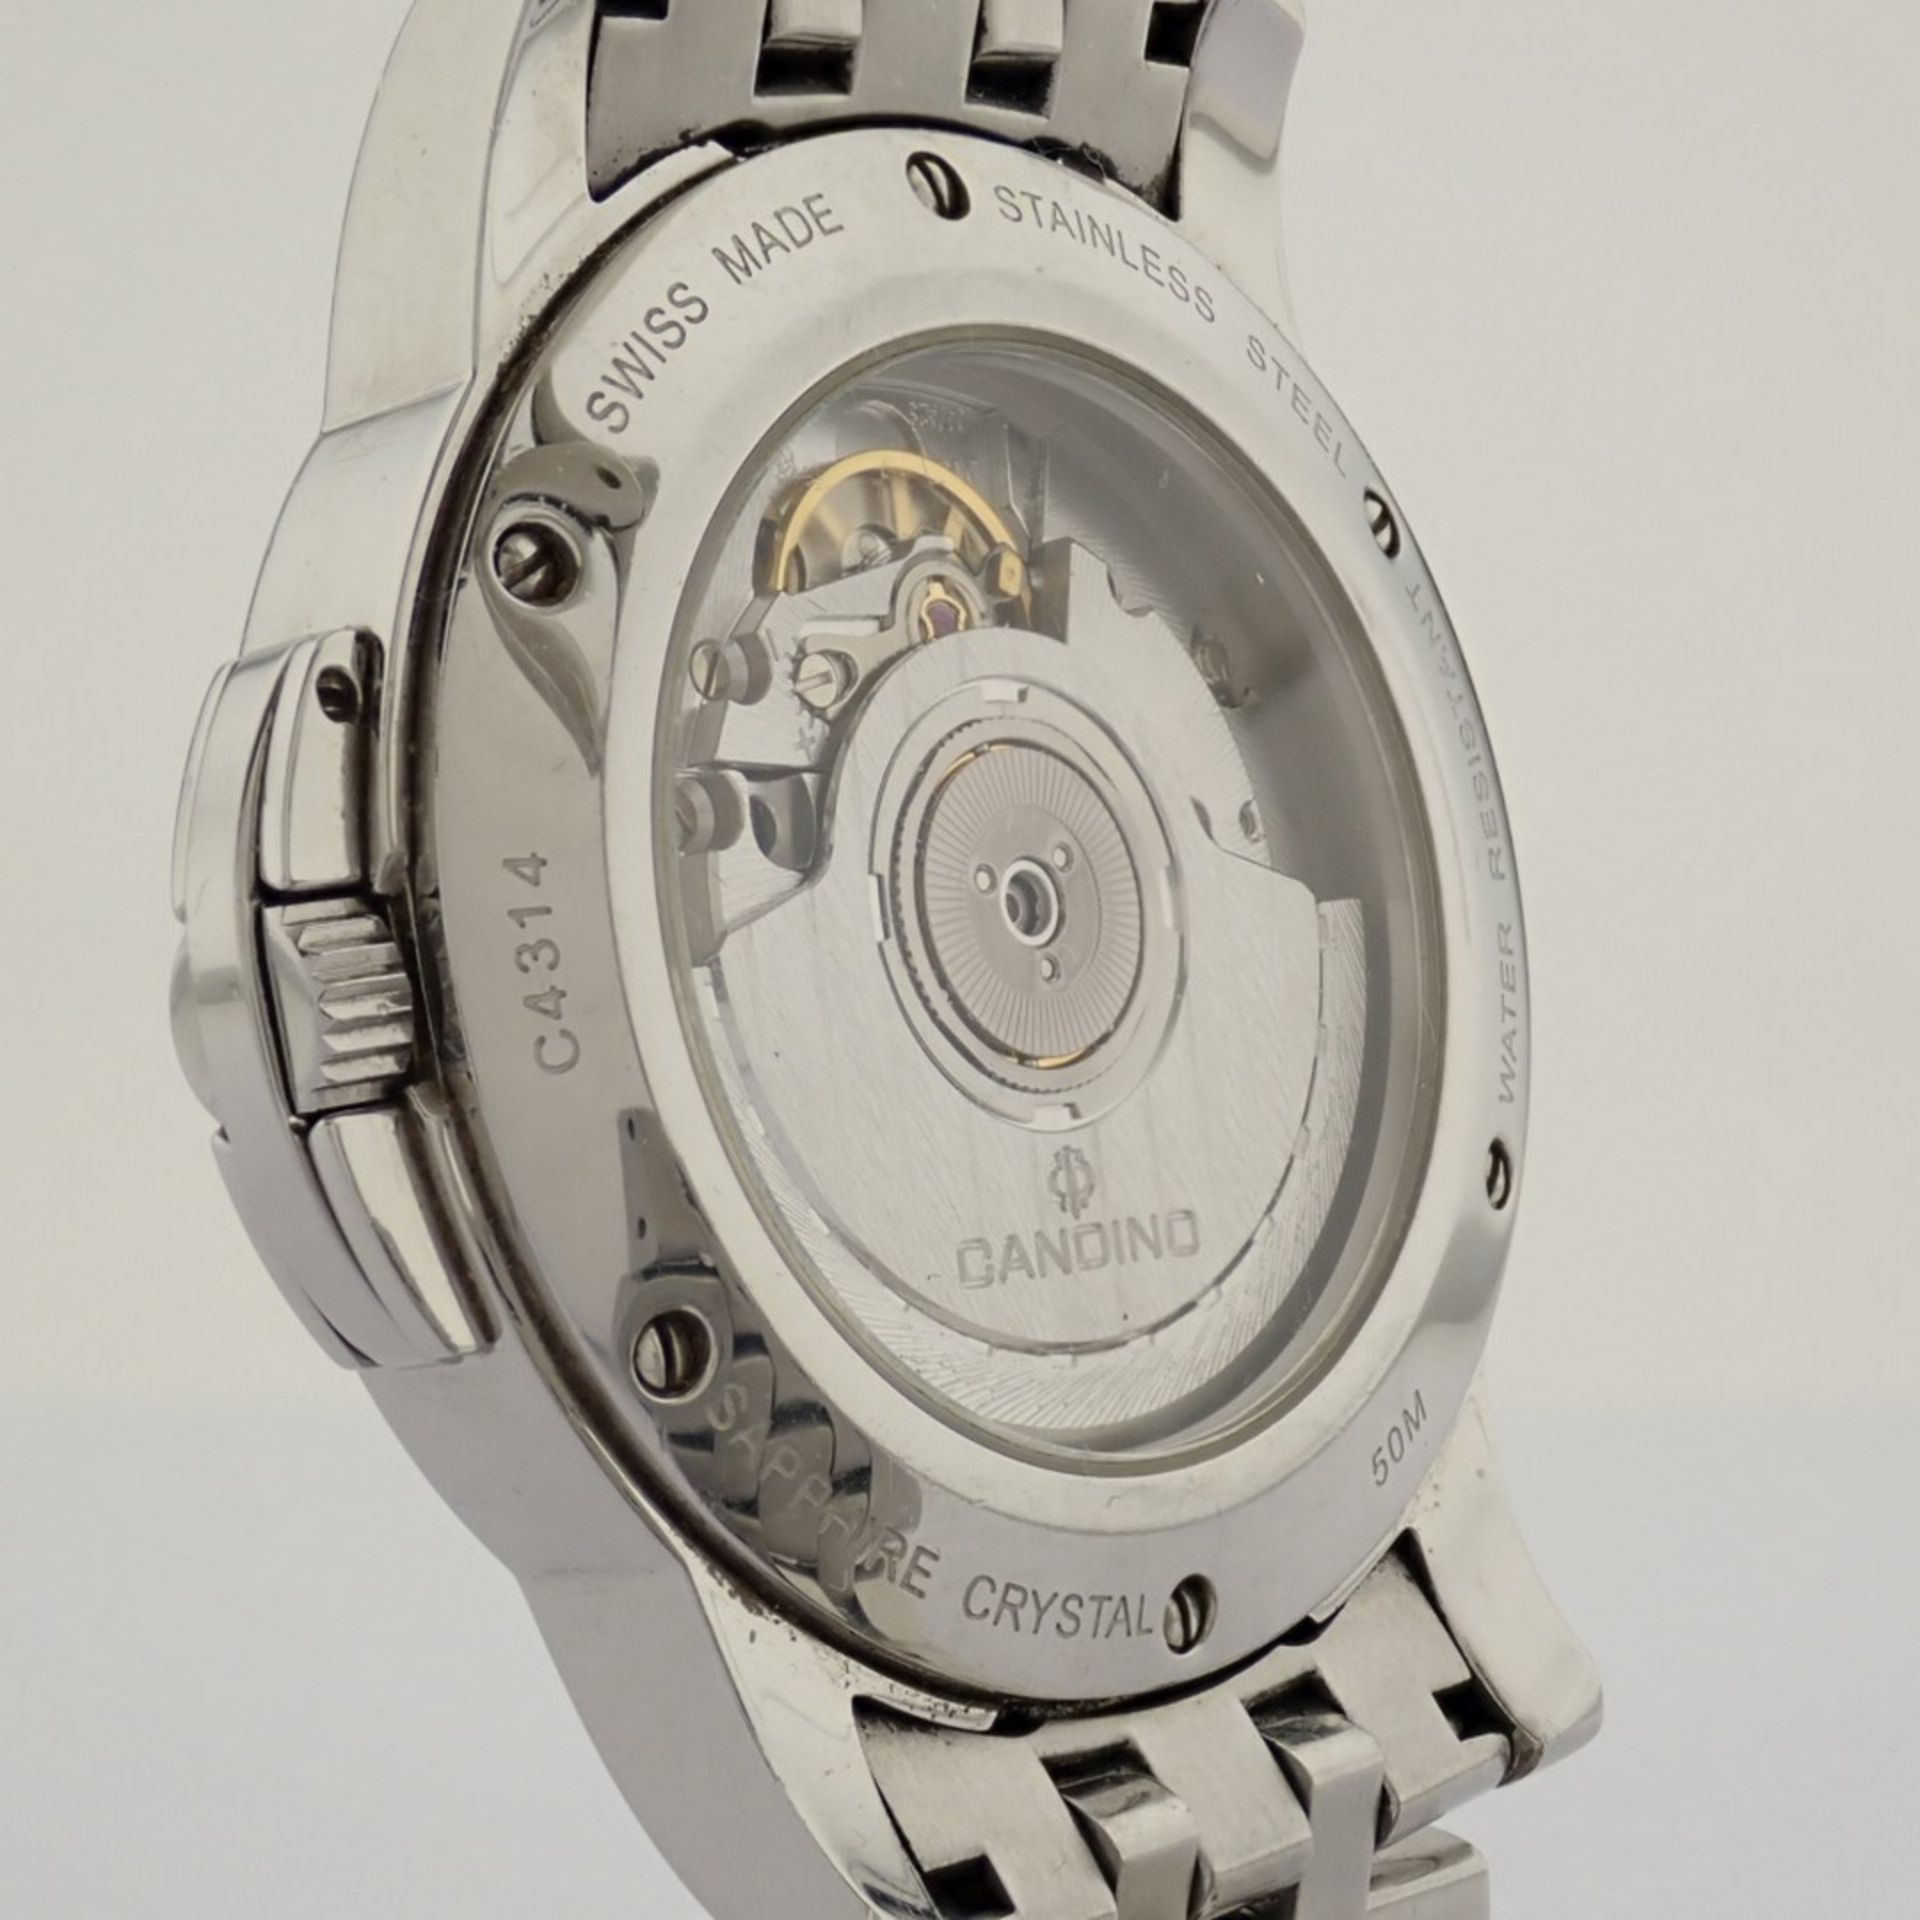 Mido / Ocean Star Diamond - Mother of Pearl Automatic Date - Lady's Steel Wrist Watch - Image 7 of 7